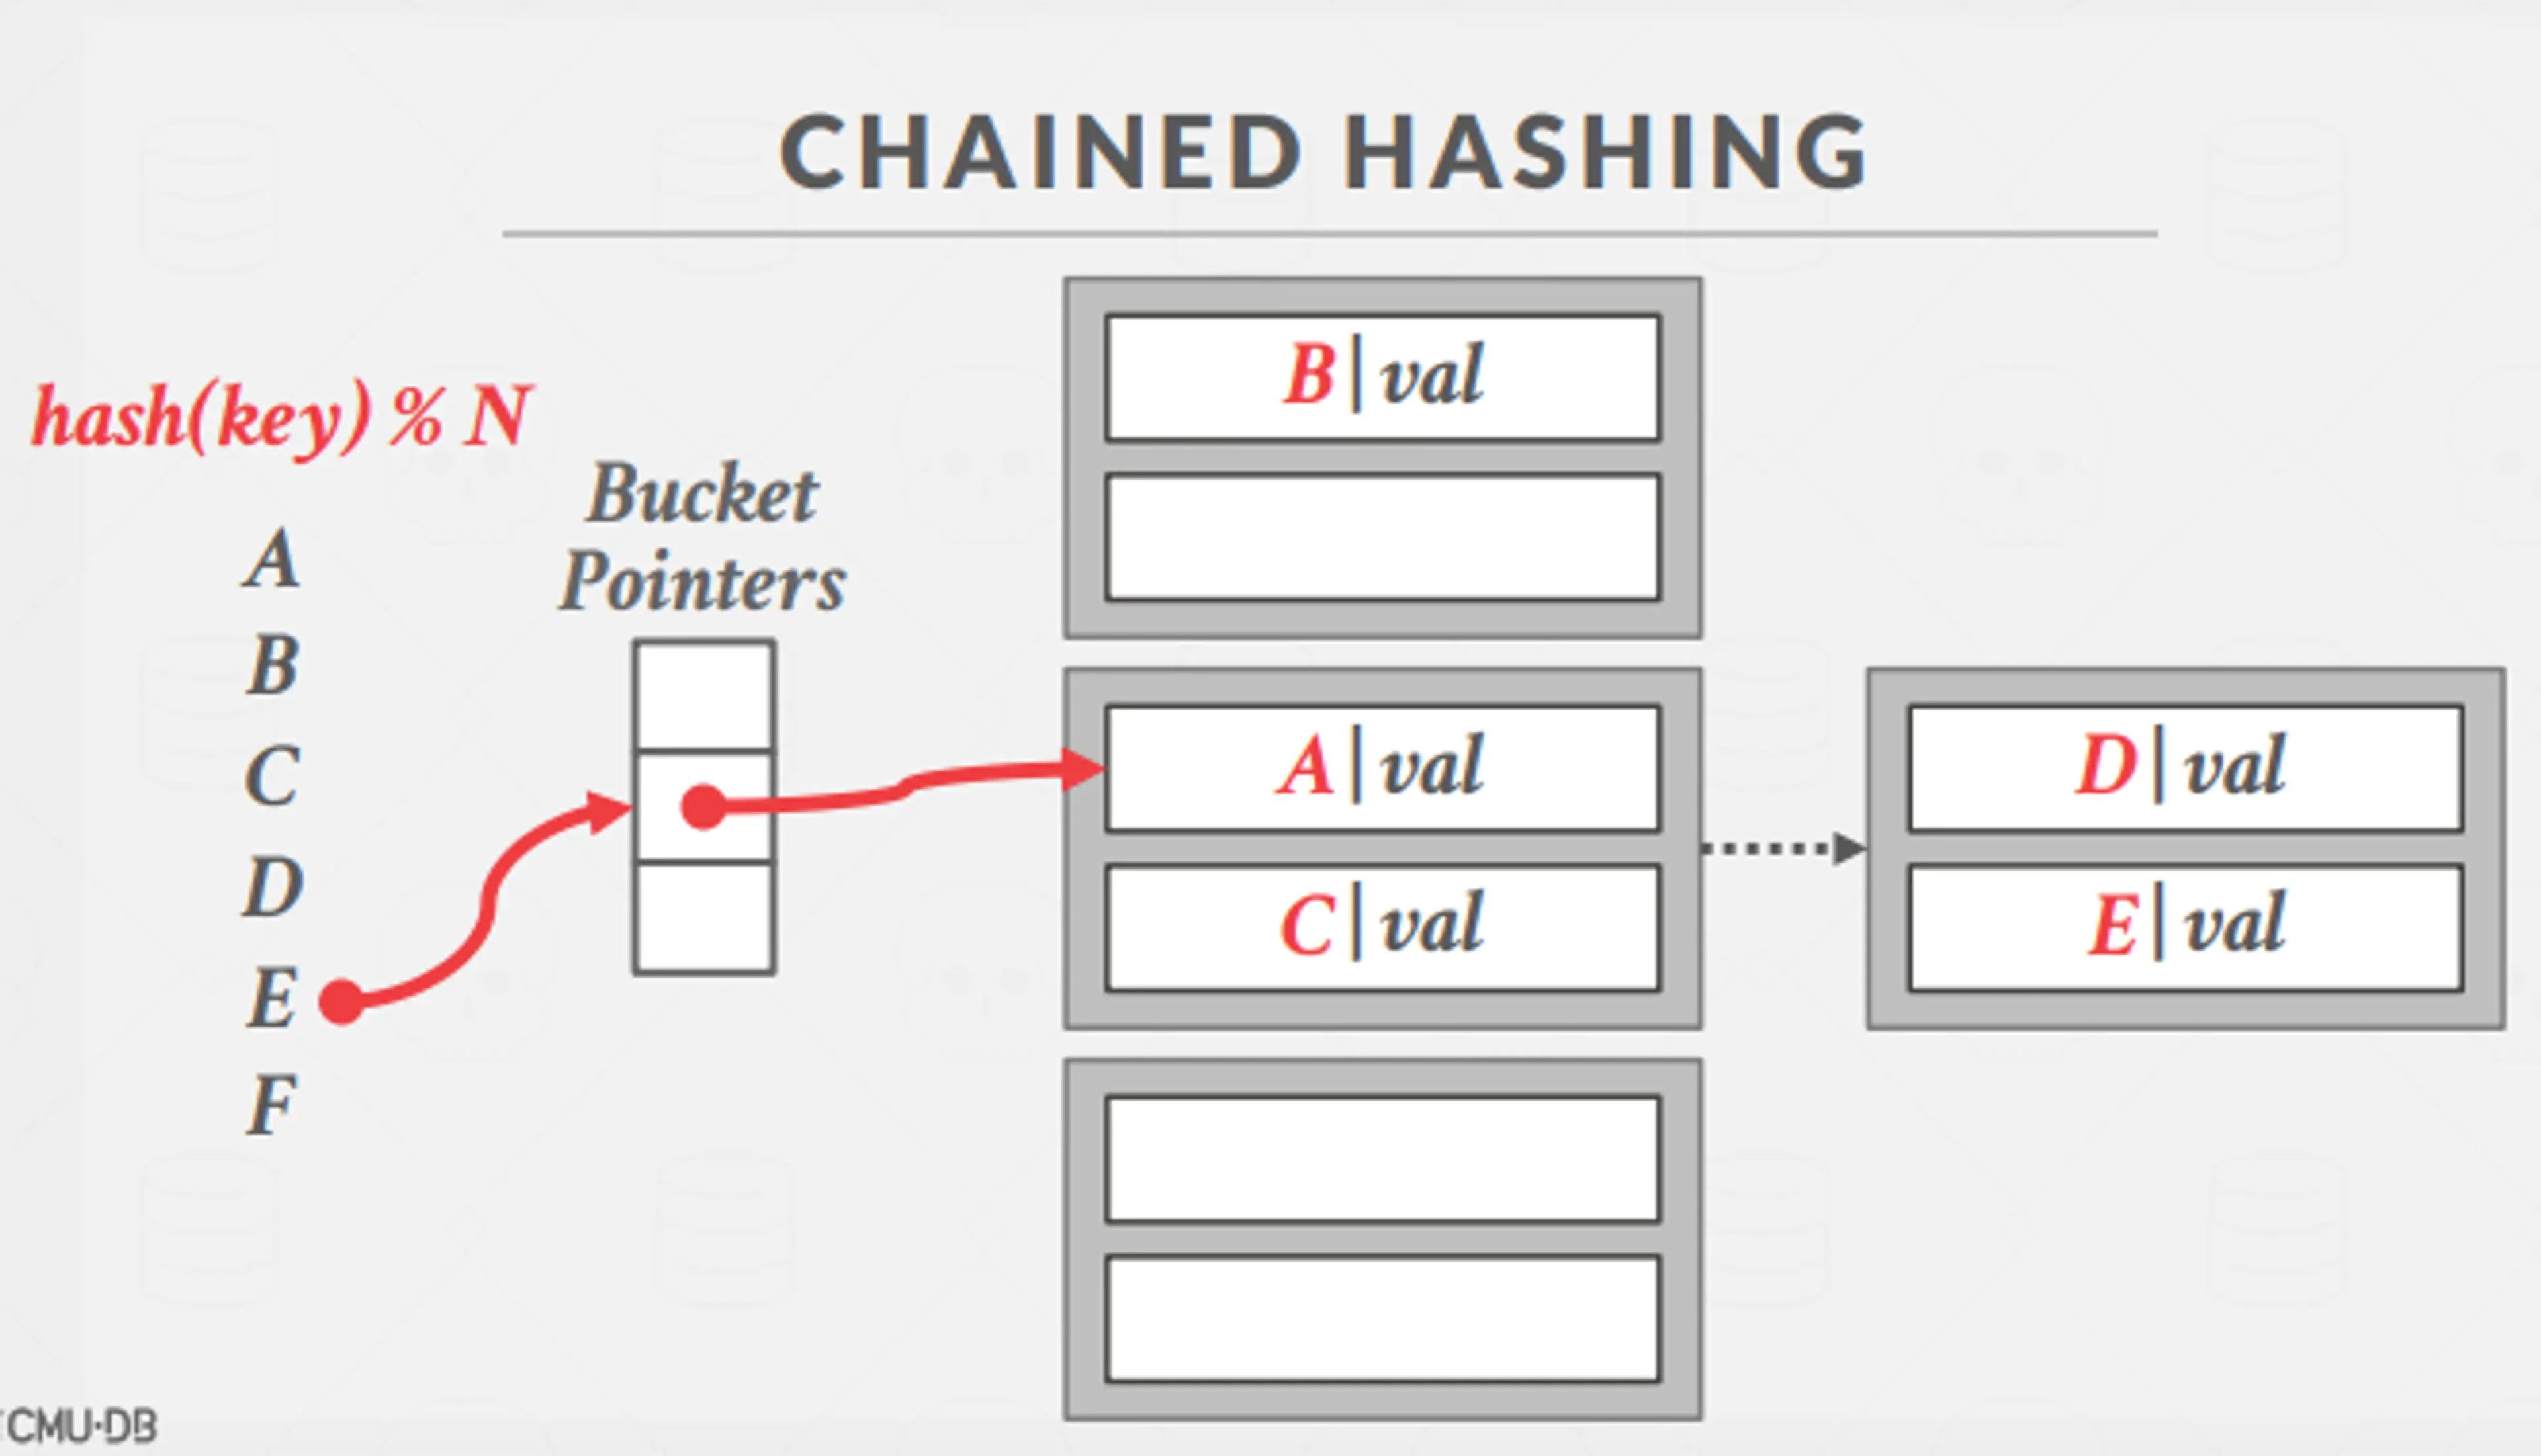 Chained Hashing